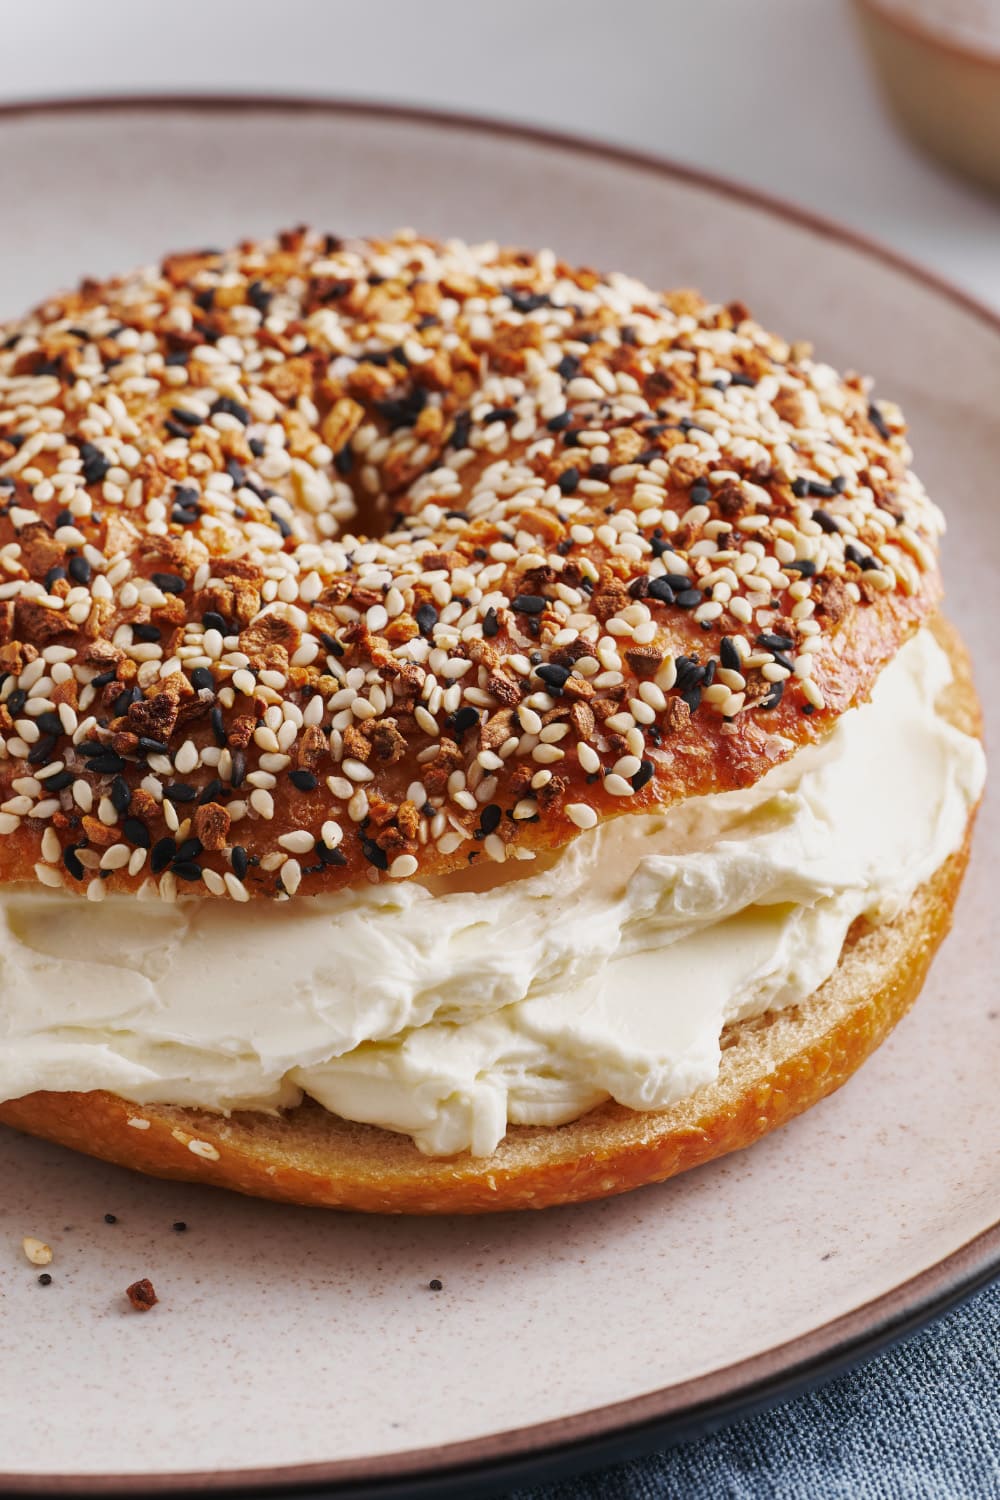 How to Make Everything Bagel Seasoning - Video & News - Jelly Toast